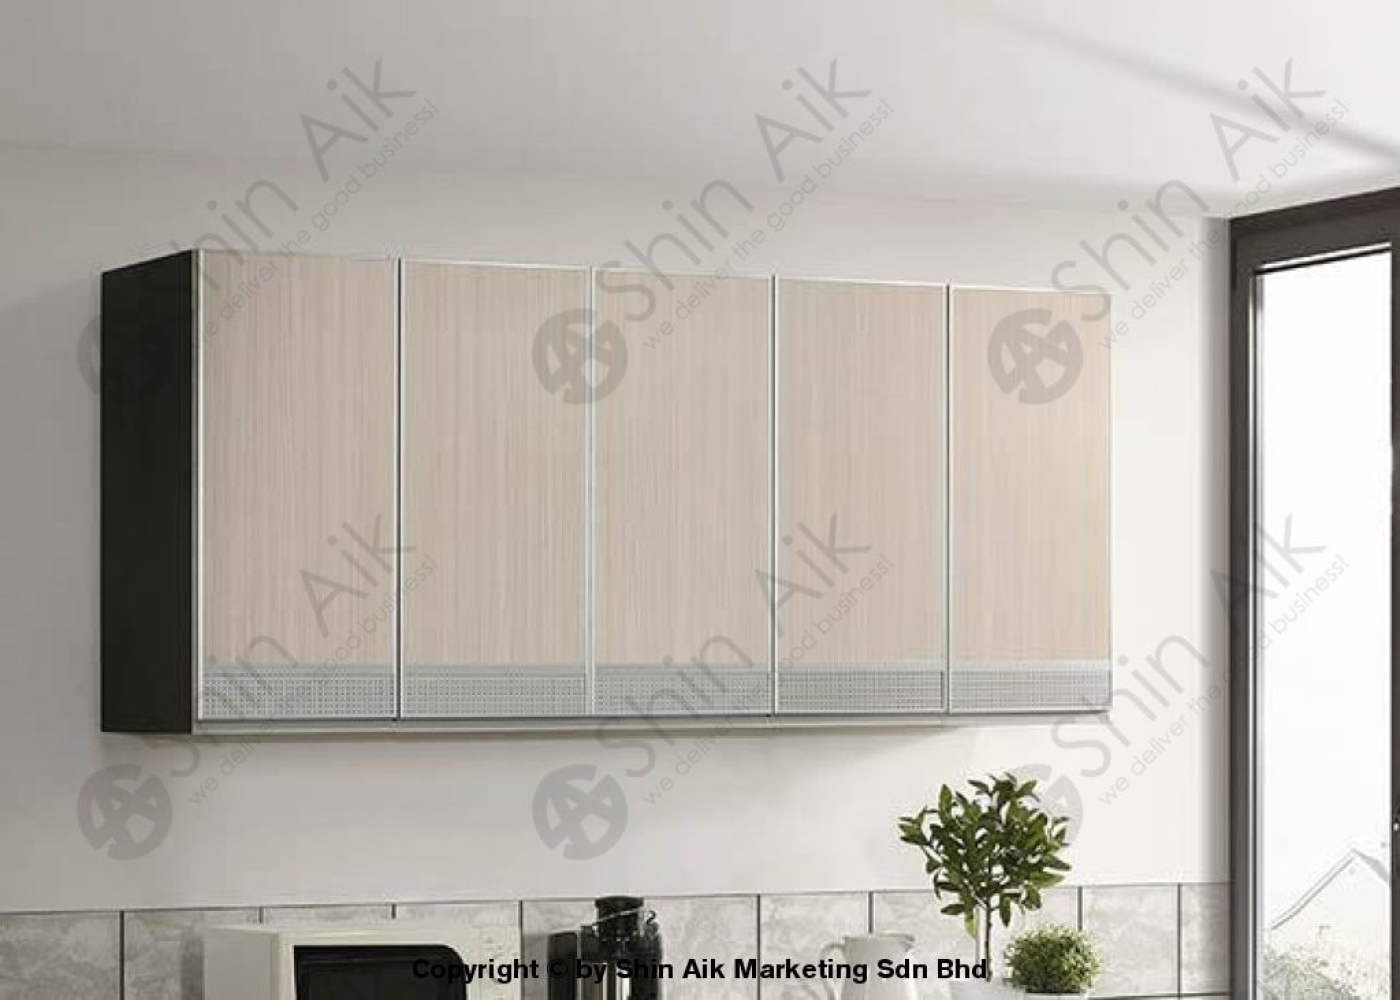 3318-526 (6'ft) Ash & Wenge Two-Tone Modular Wall Cabinet With Aluminum Doors